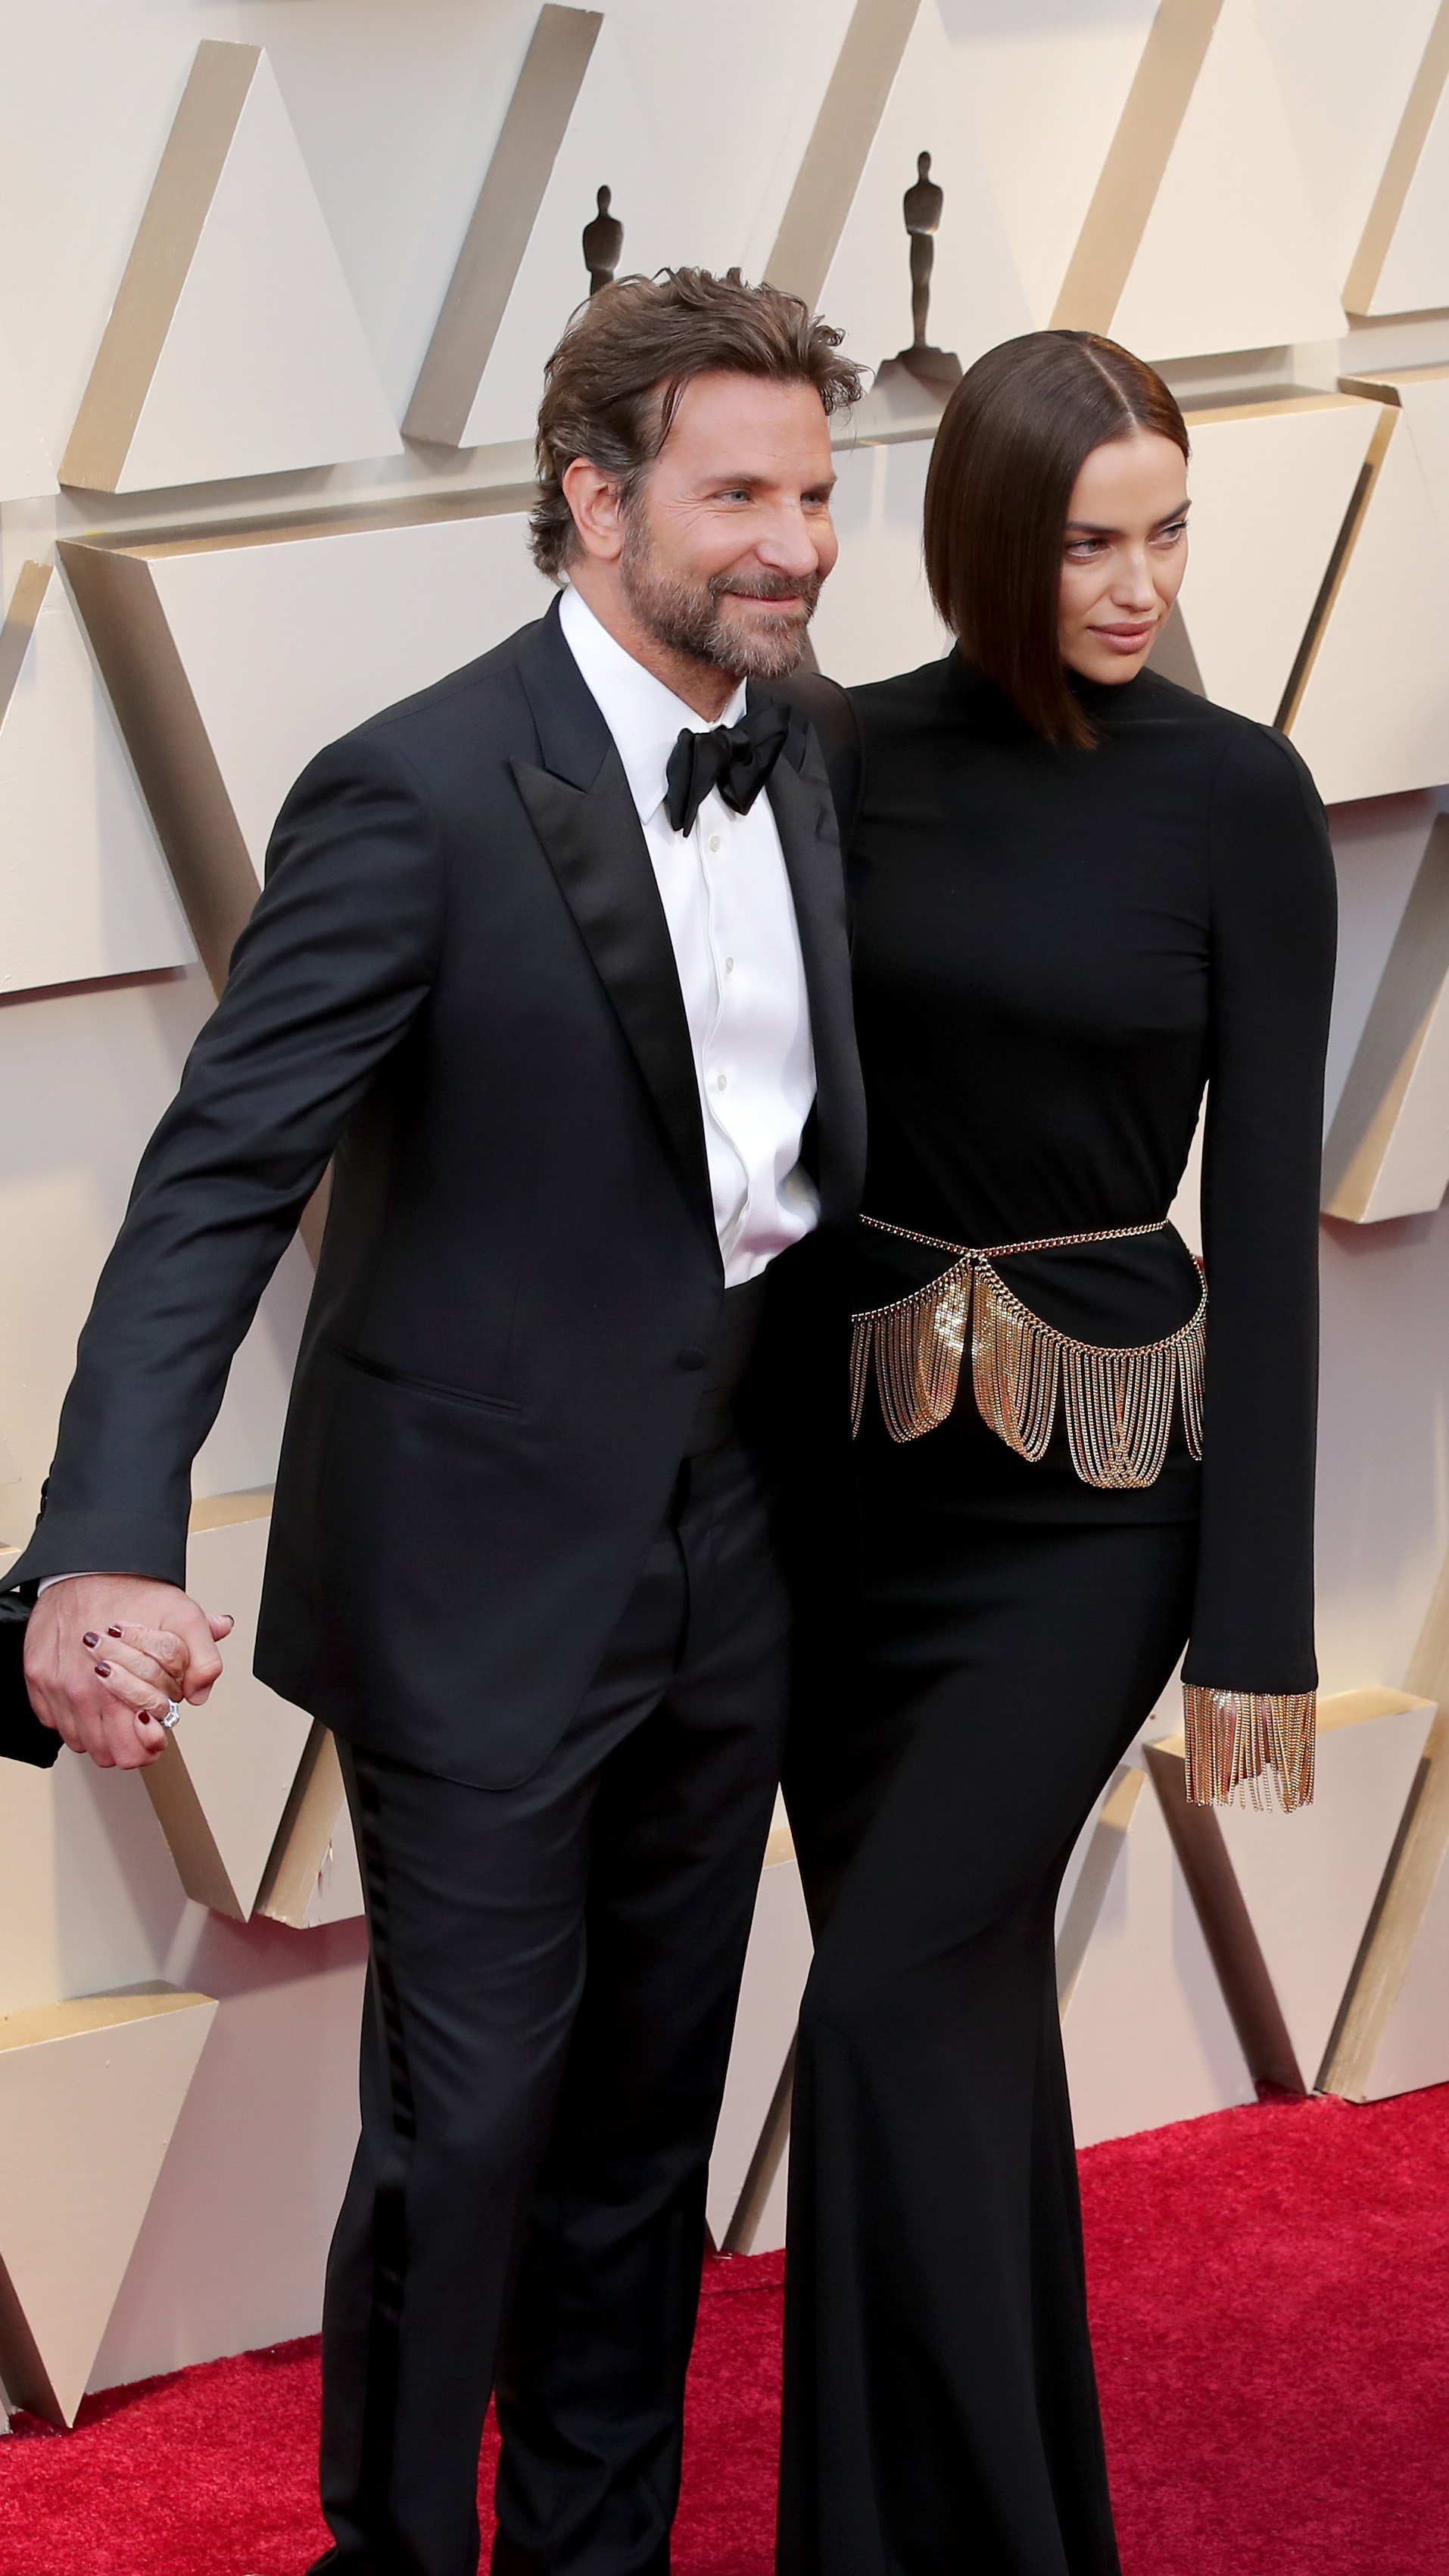 Irina Shayk and Bradley Cooper at the Oscars in 2019 | Photo: Getty Images